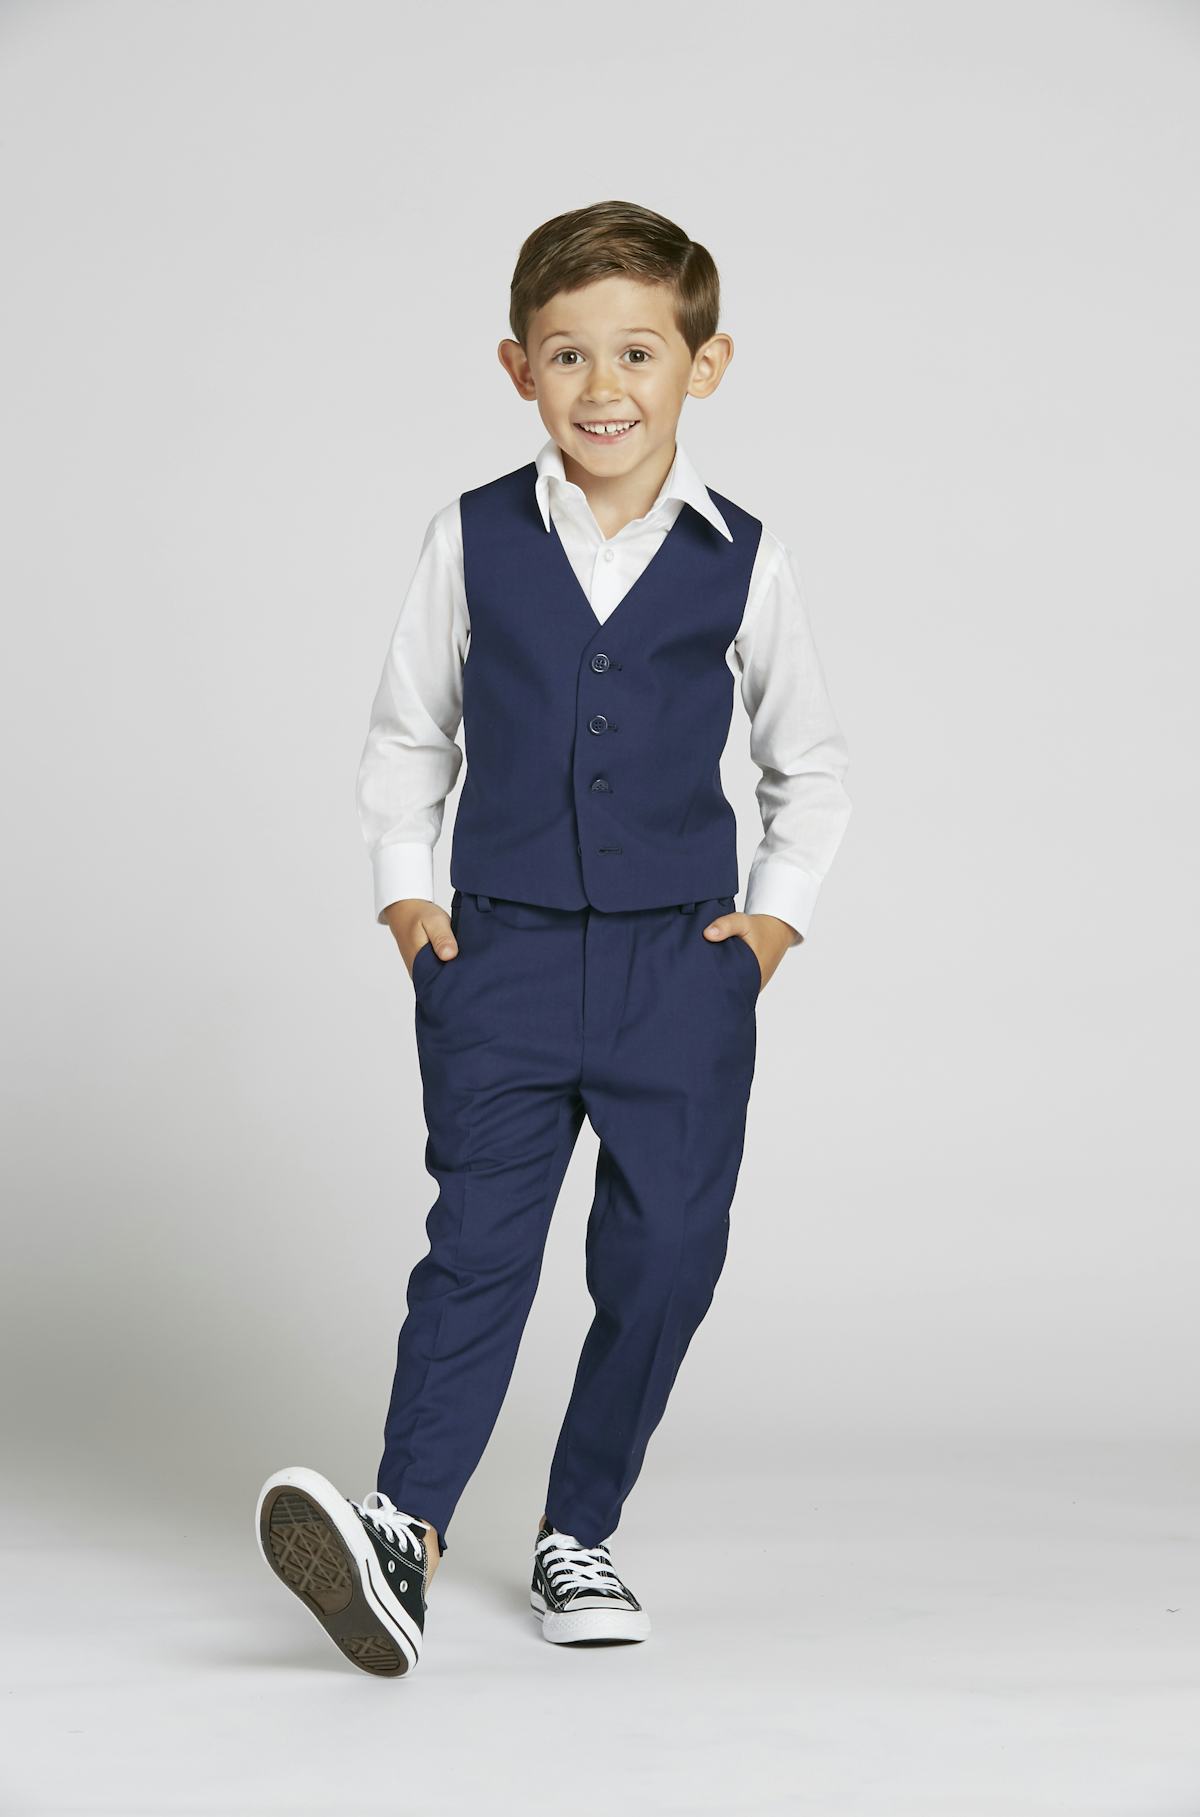 Suits for ring bearers, kids’ Easter suits and boys’ Christmas attire